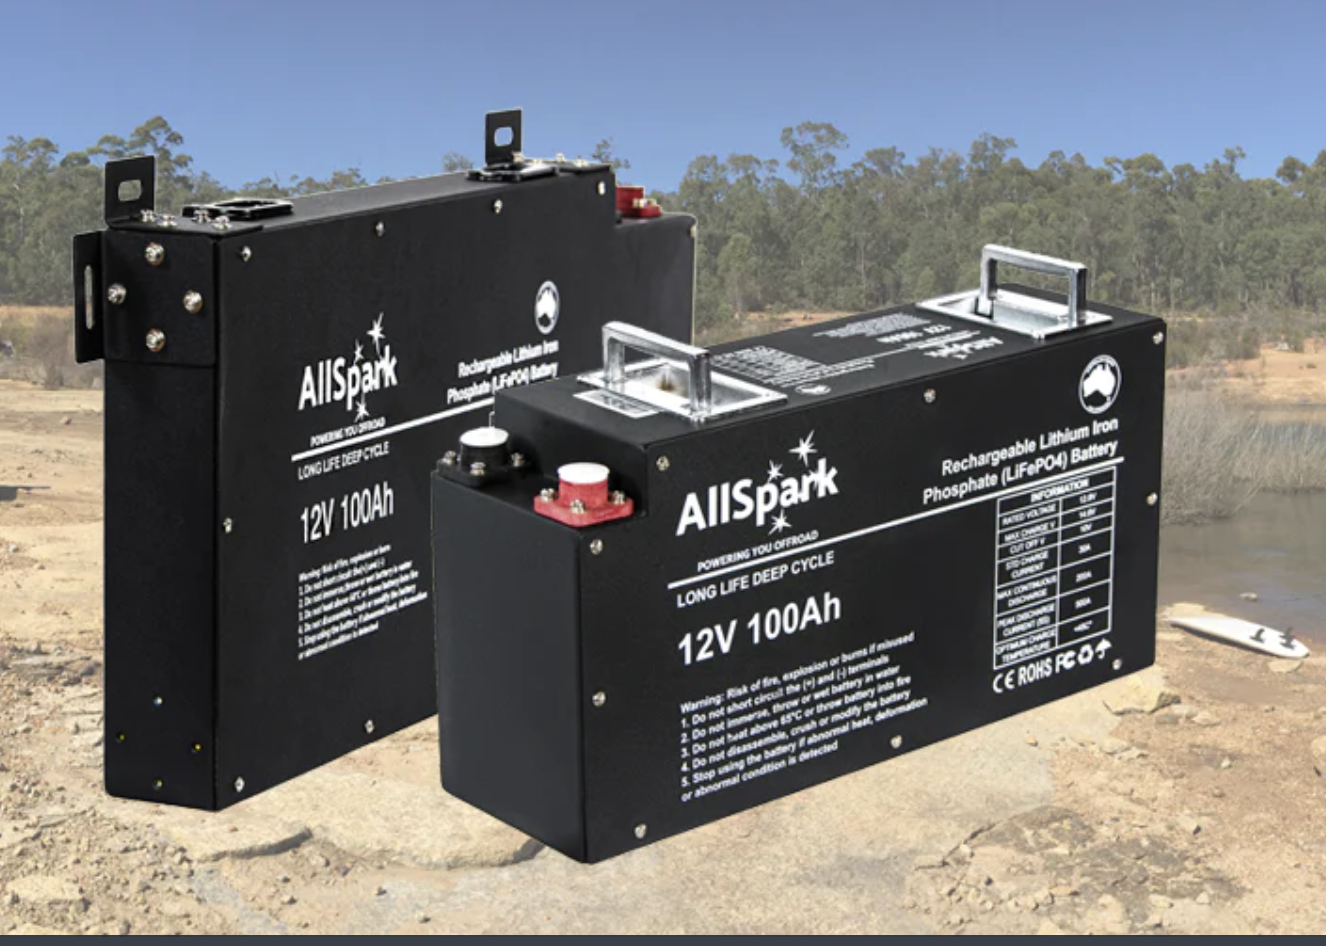 Get The Best Portable Deep-Cycle Off-Grid Lithium Batteries For 4x4 Enthusiasts